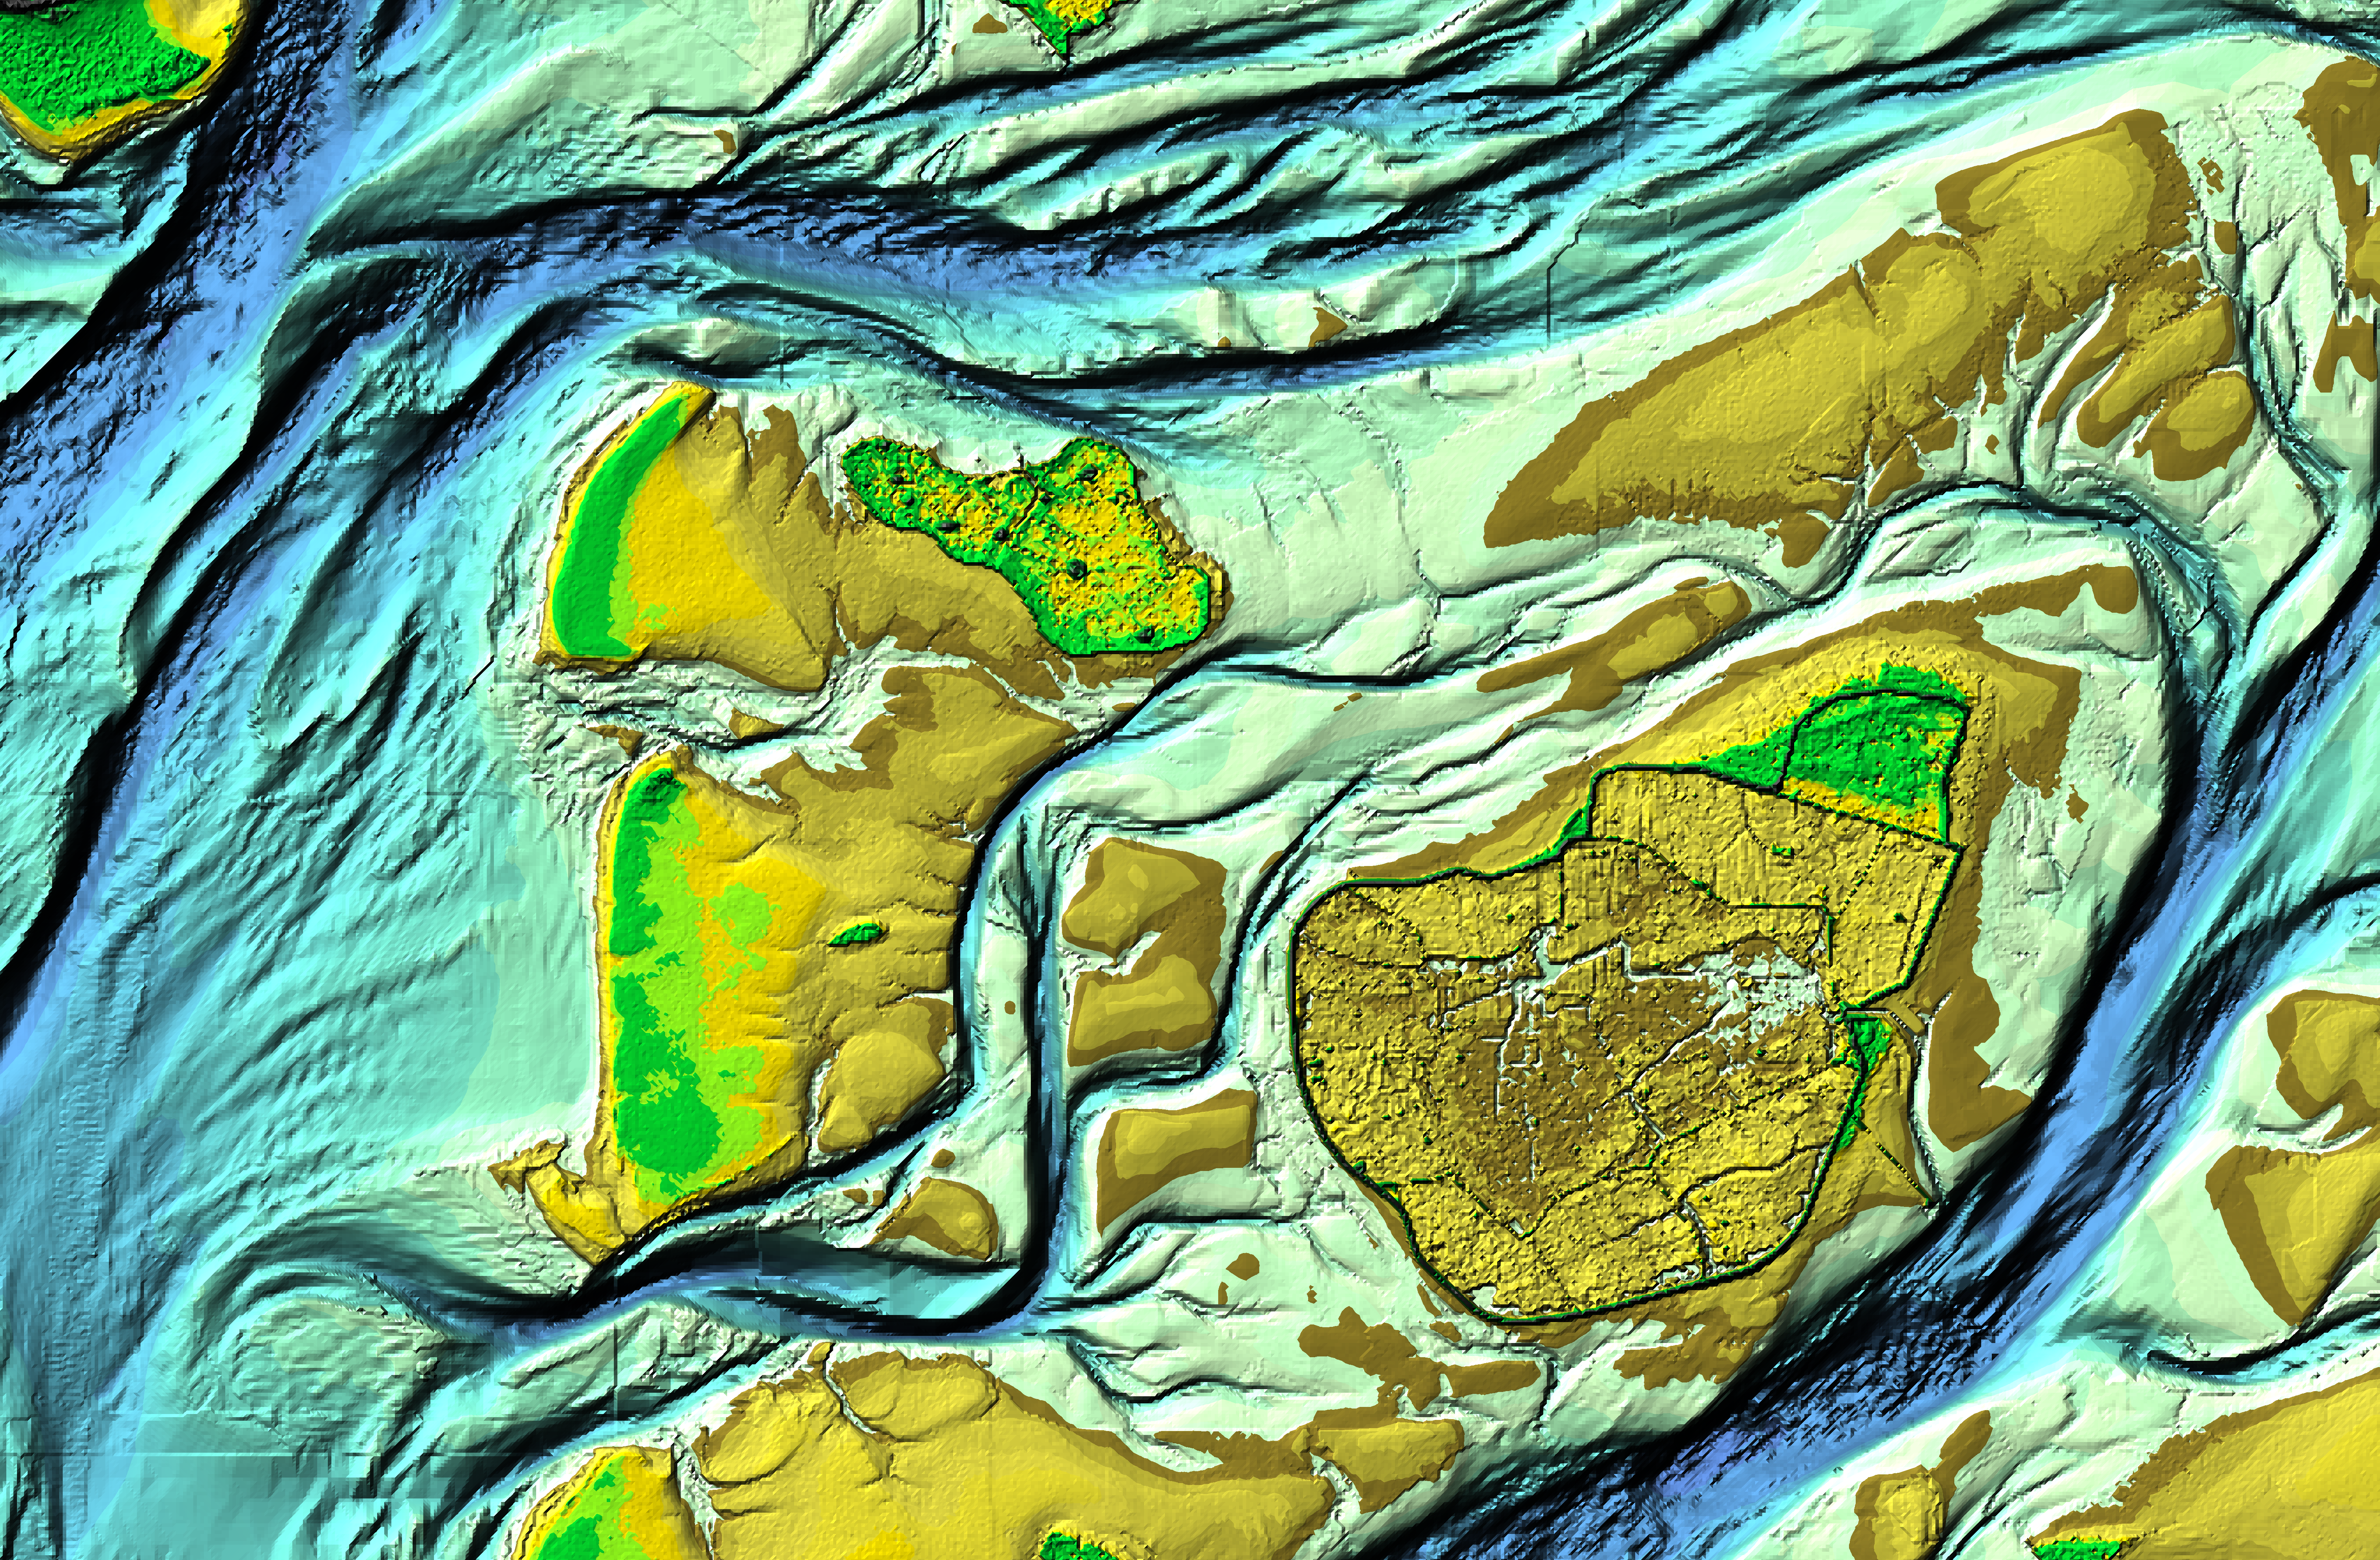 Bathymetry from Pellworm (shaded)